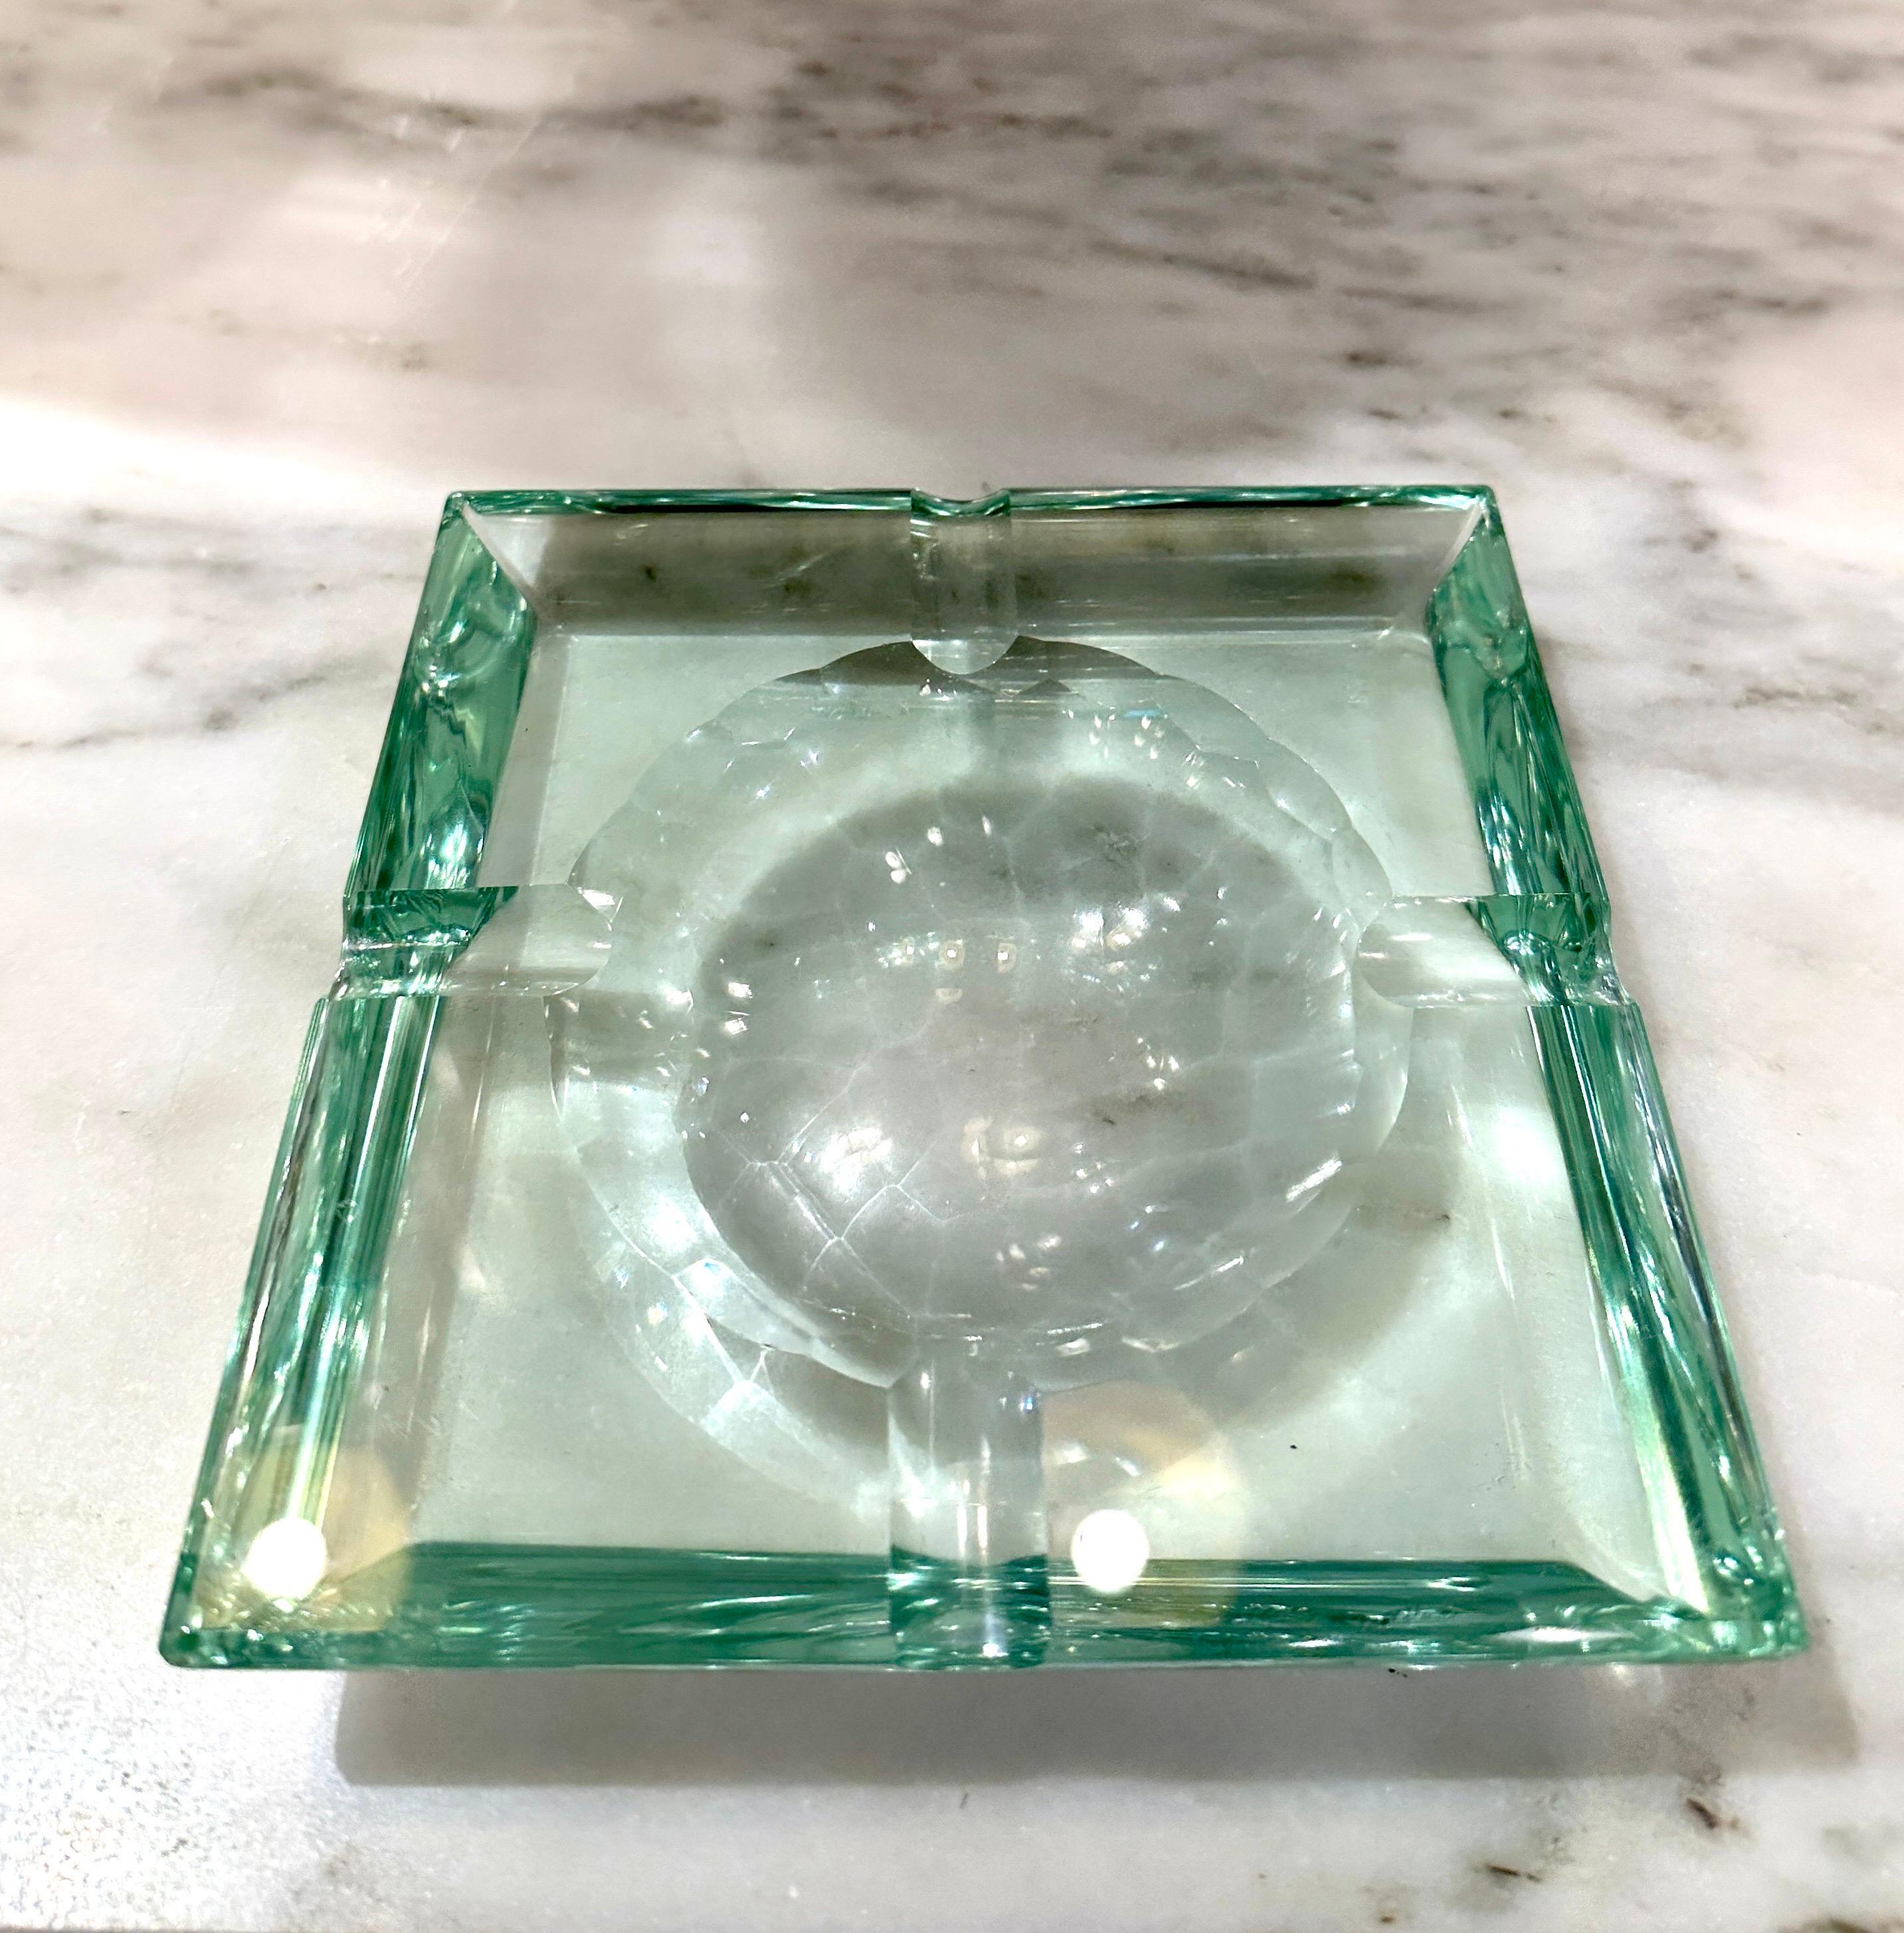 Indulge in the elegance of this exquisite ashtray or Vide-Poche, crafted in Italy during the prestigious Fontana Arte's prime in the 1960s. The square-shaped design boasts a transparent crystal glass with a subtle green hue.

This versatile piece